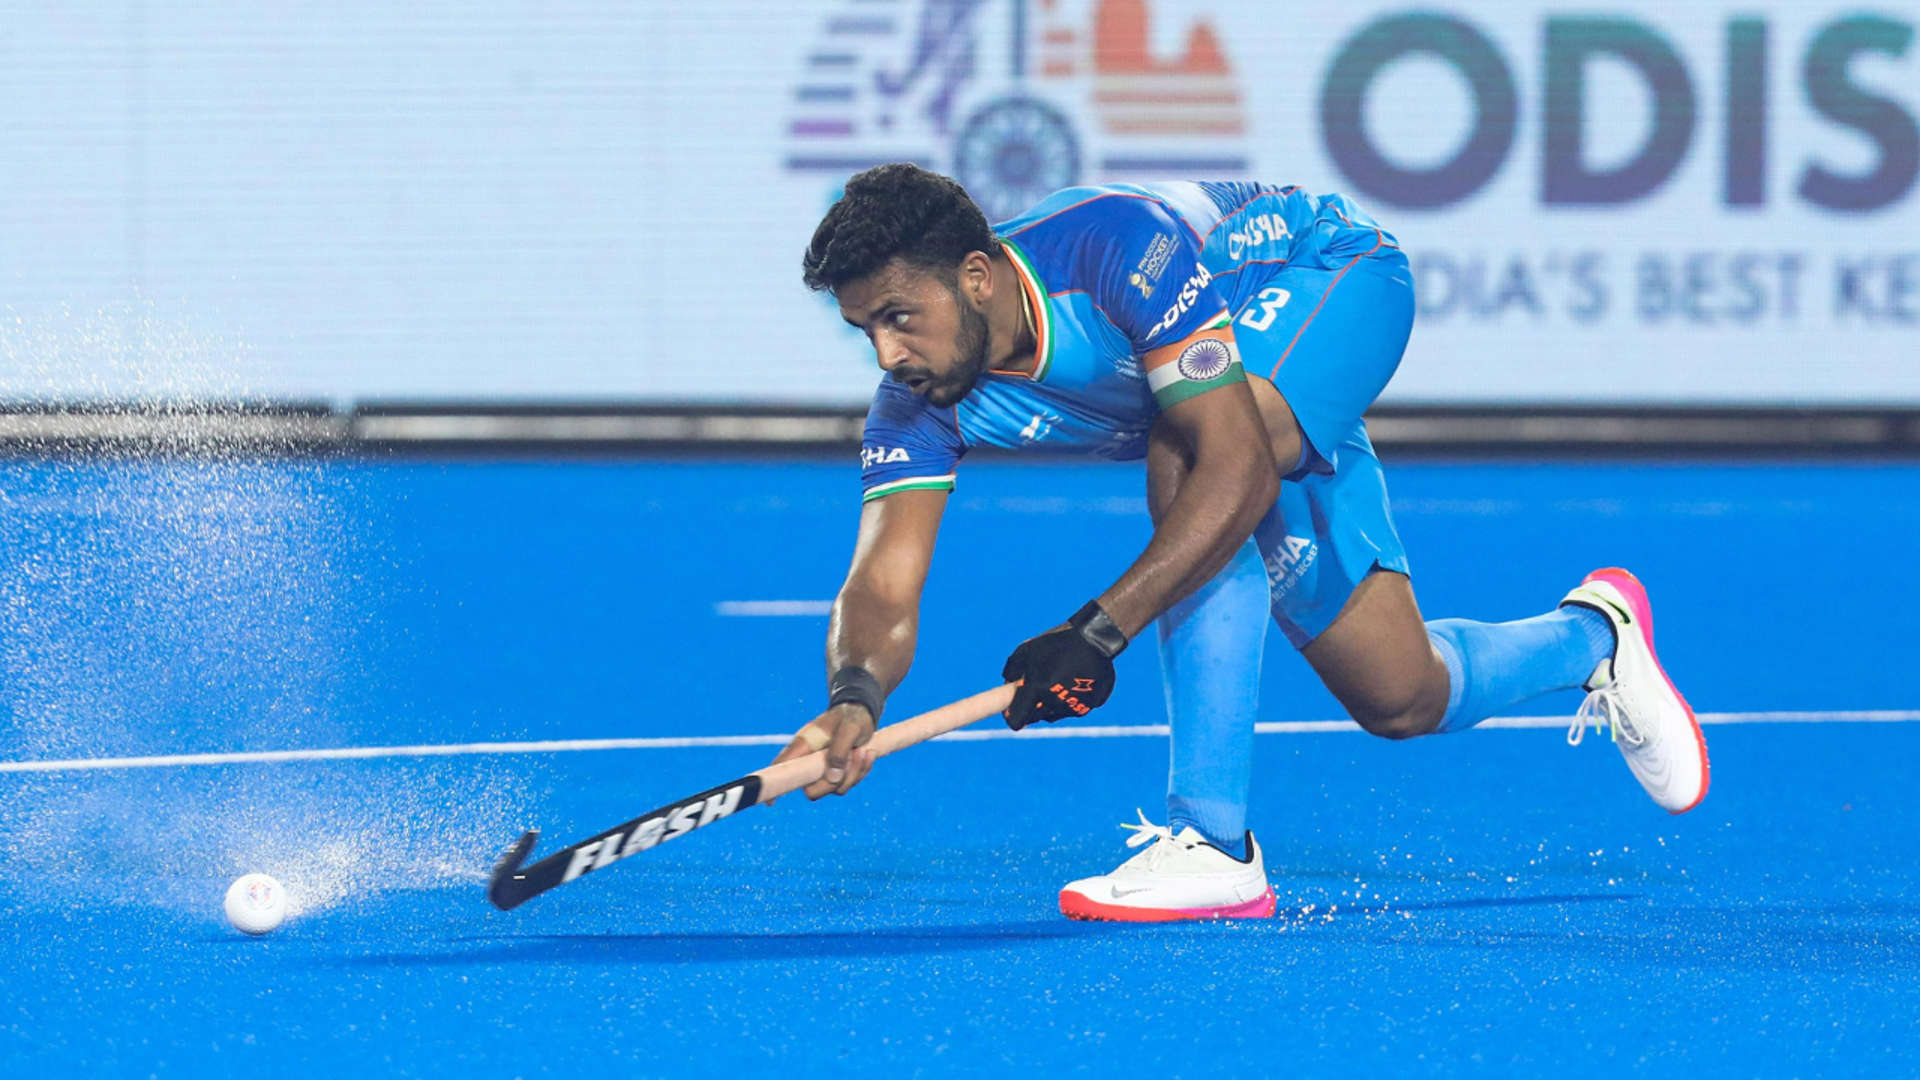 The group stage fixture between India and England resulted in a draw